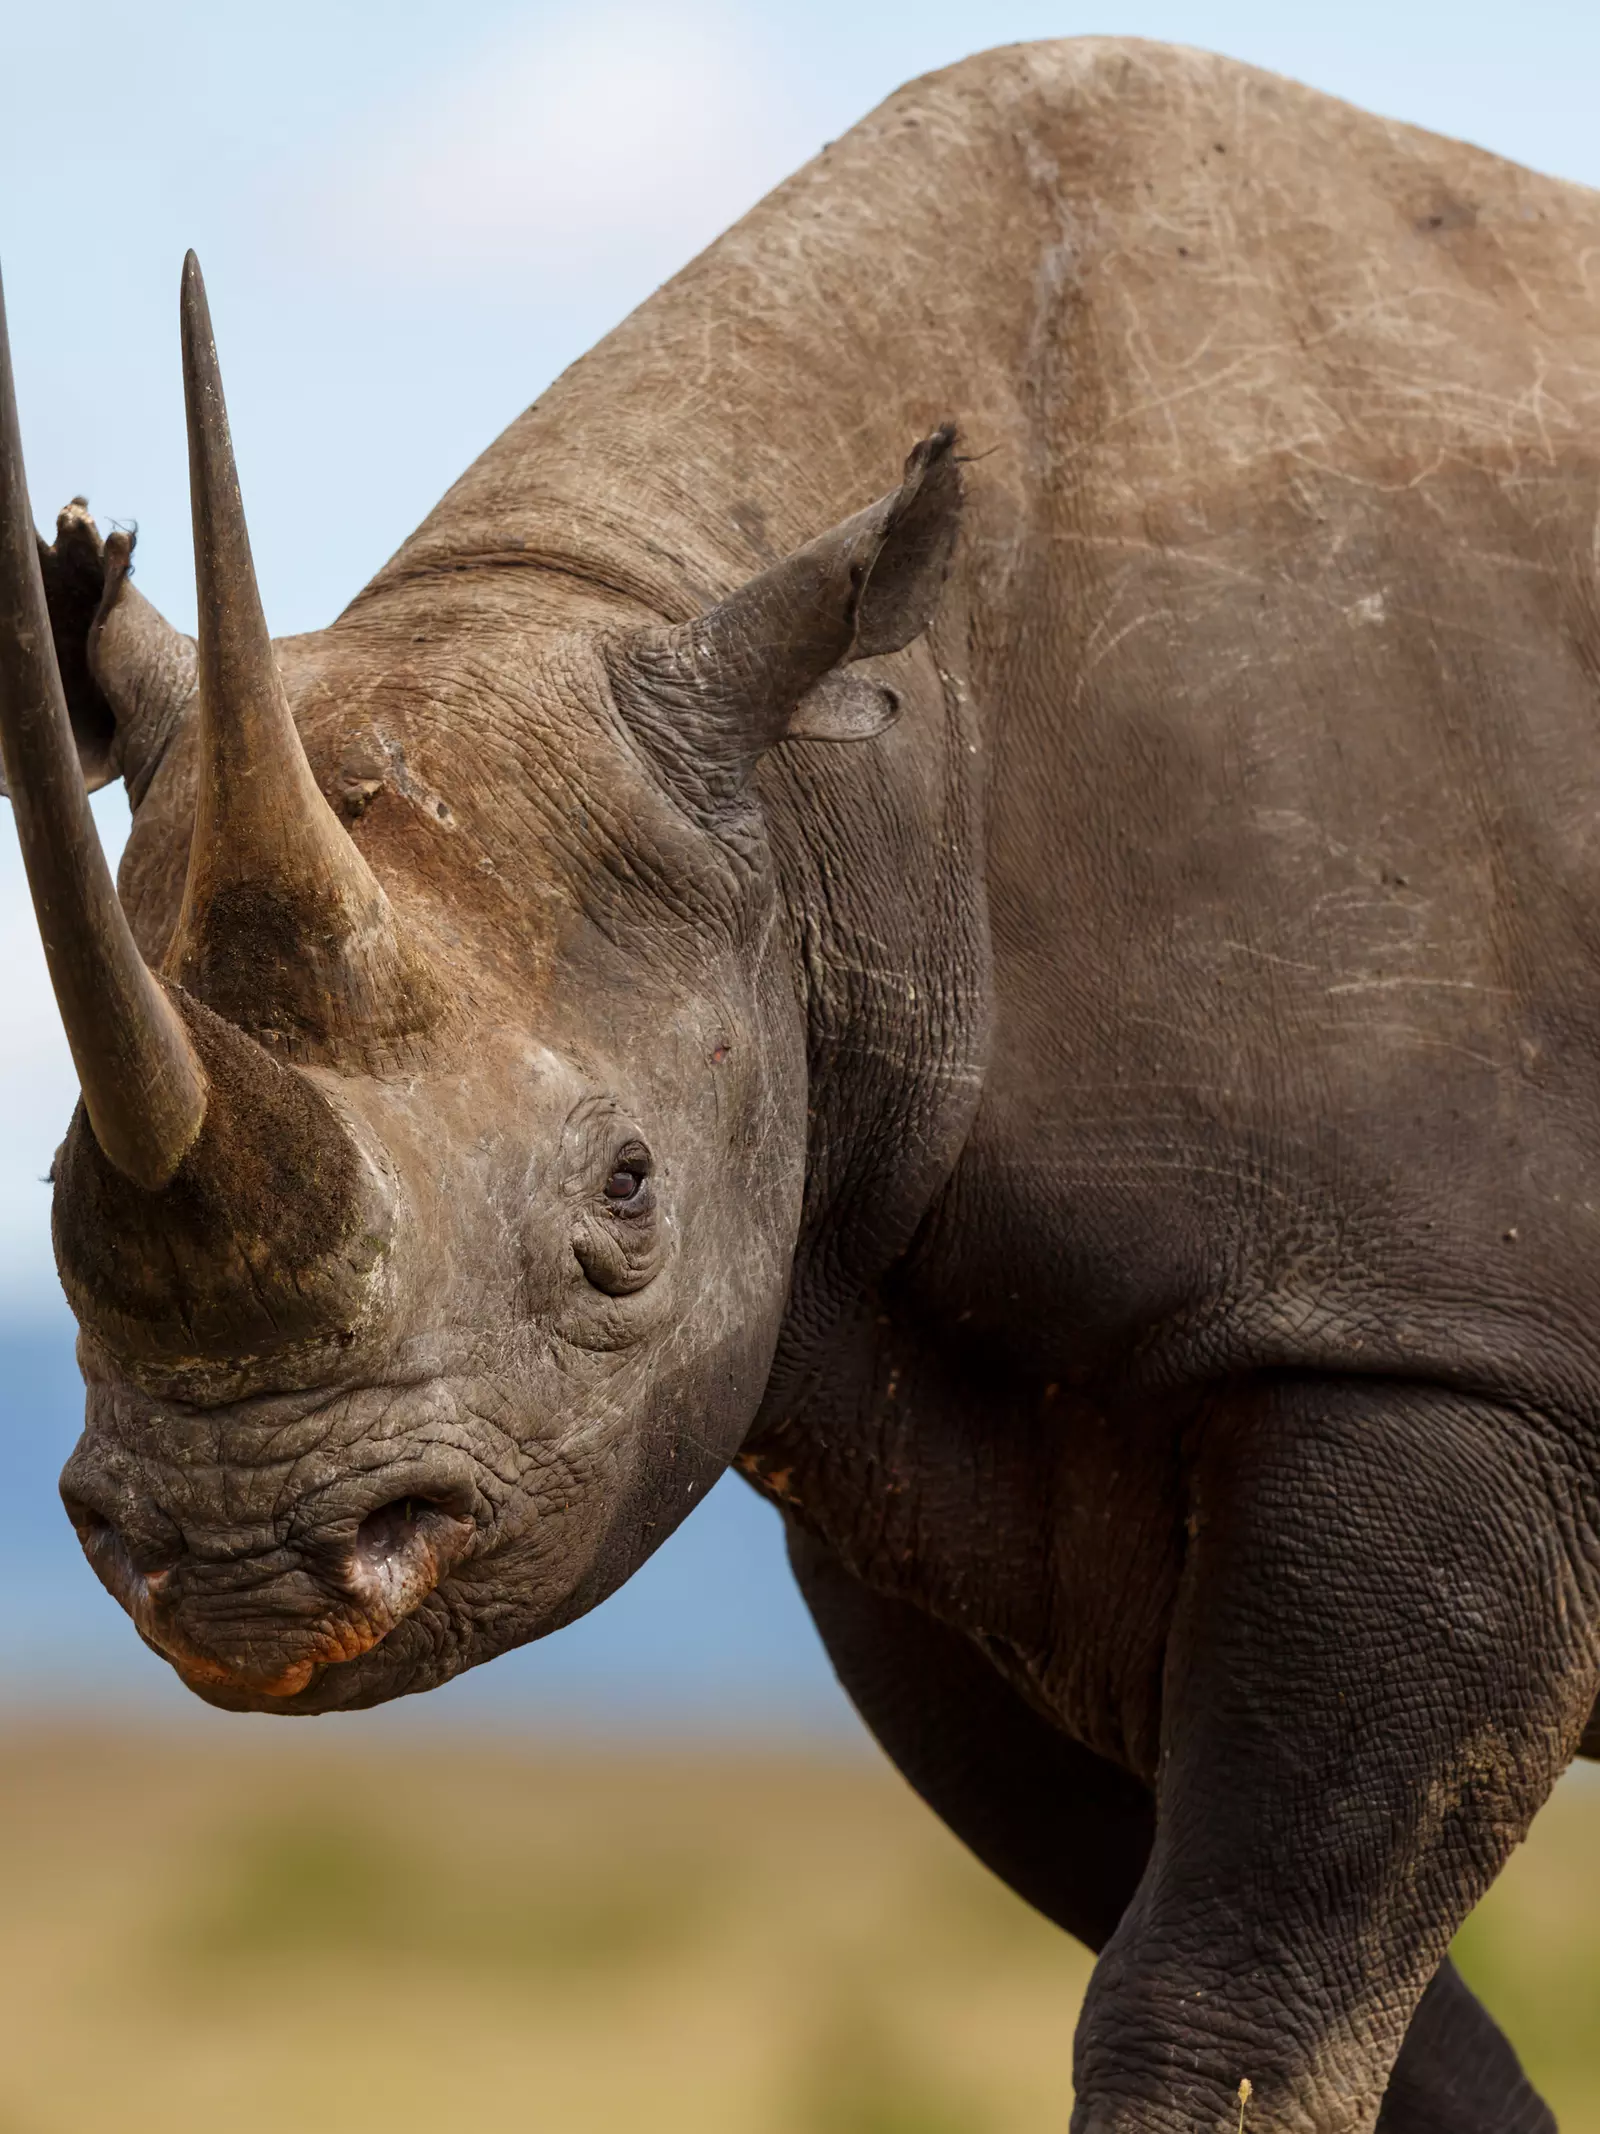 Black rhino, hooked up lip can be seen which is main difference with white rhino